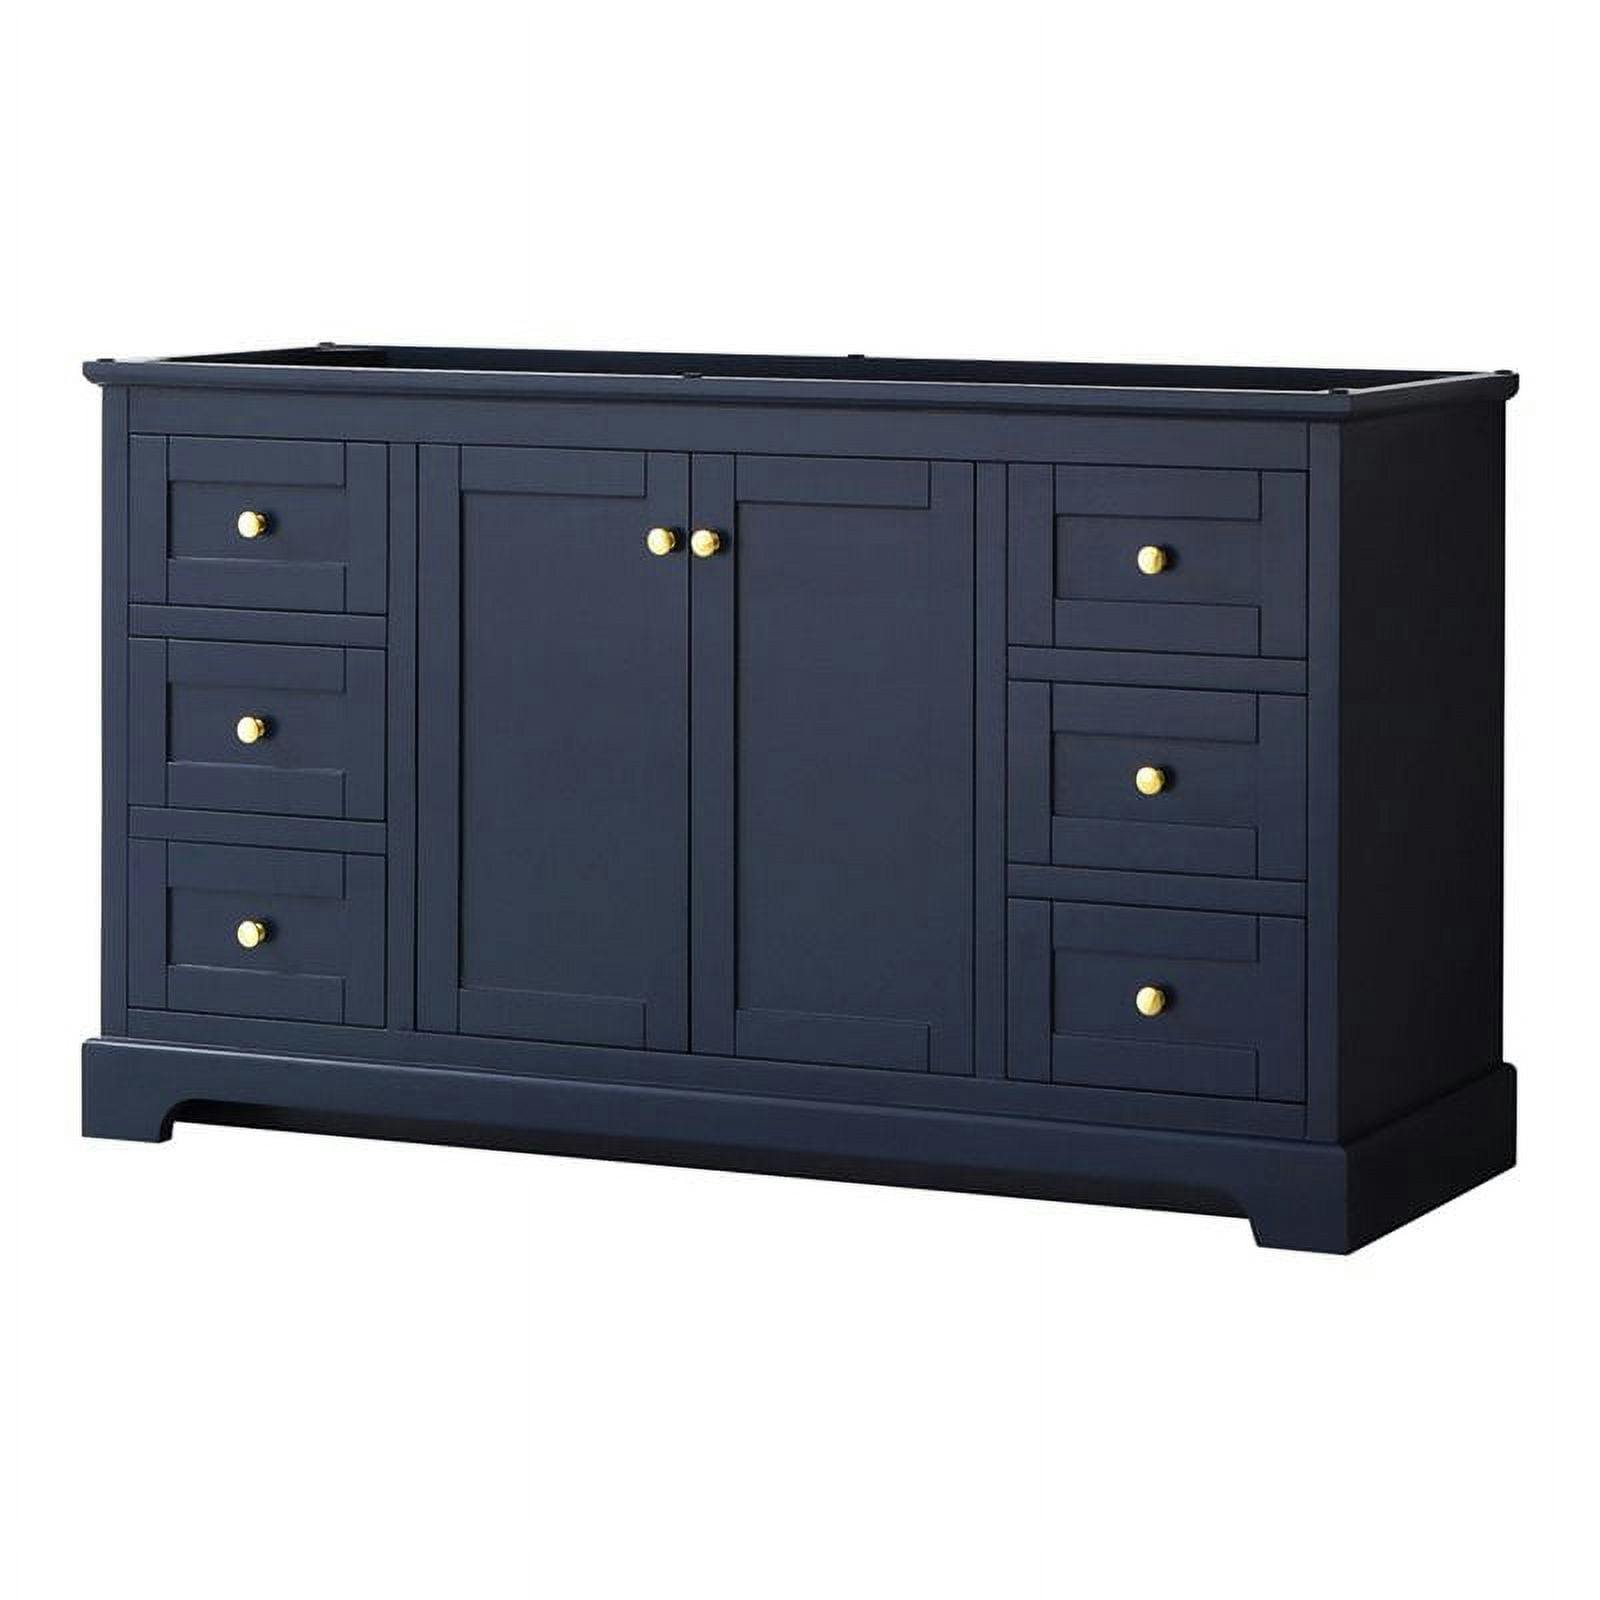 Avery 59" Dark Blue Freestanding Bathroom Vanity Base with Gold Accents